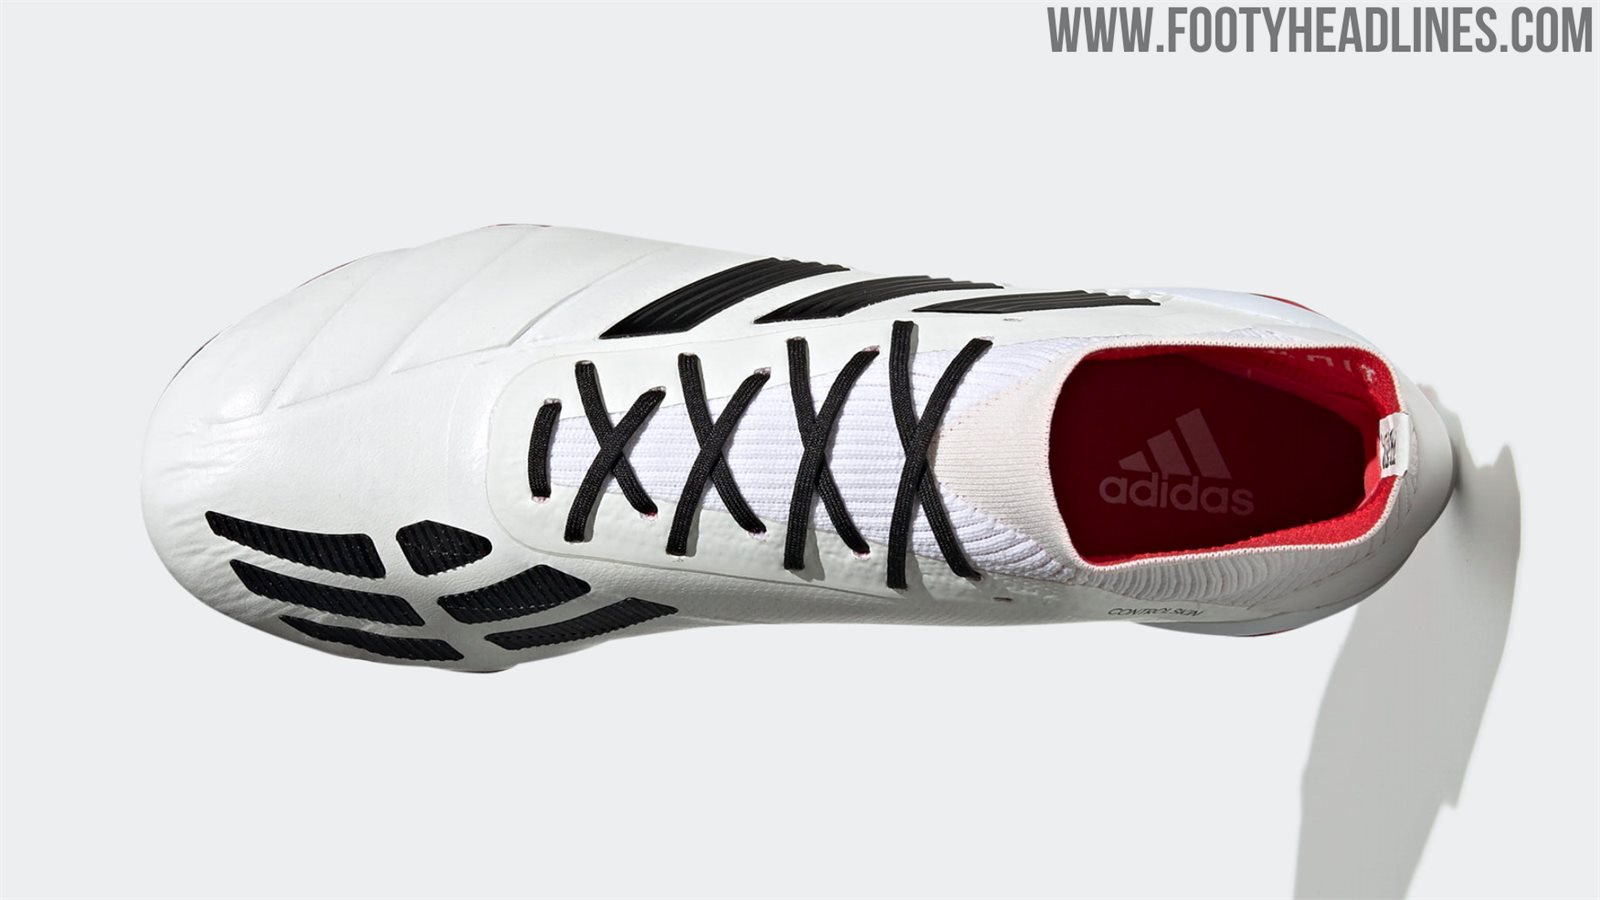 White Adidas Predator Mania 19 Limited-Edition Boots Released - Footy ...